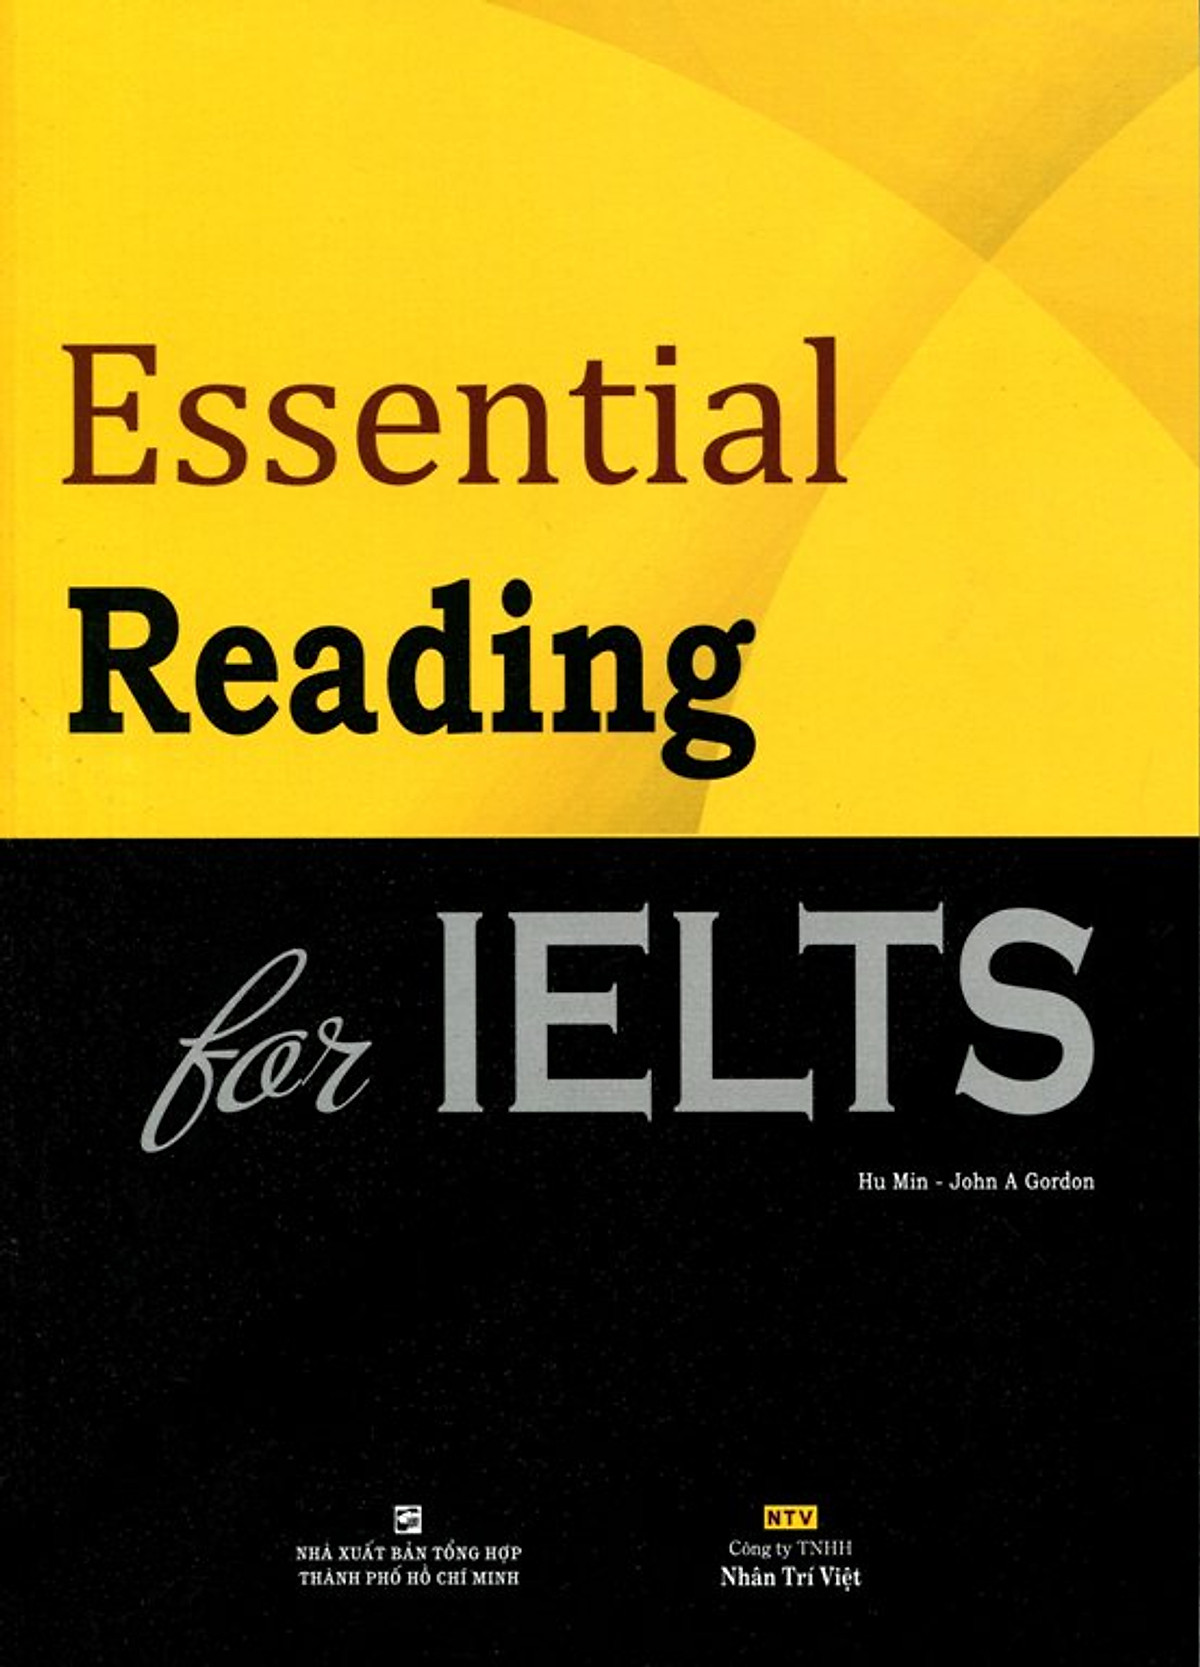 Essential Reading for IELTS